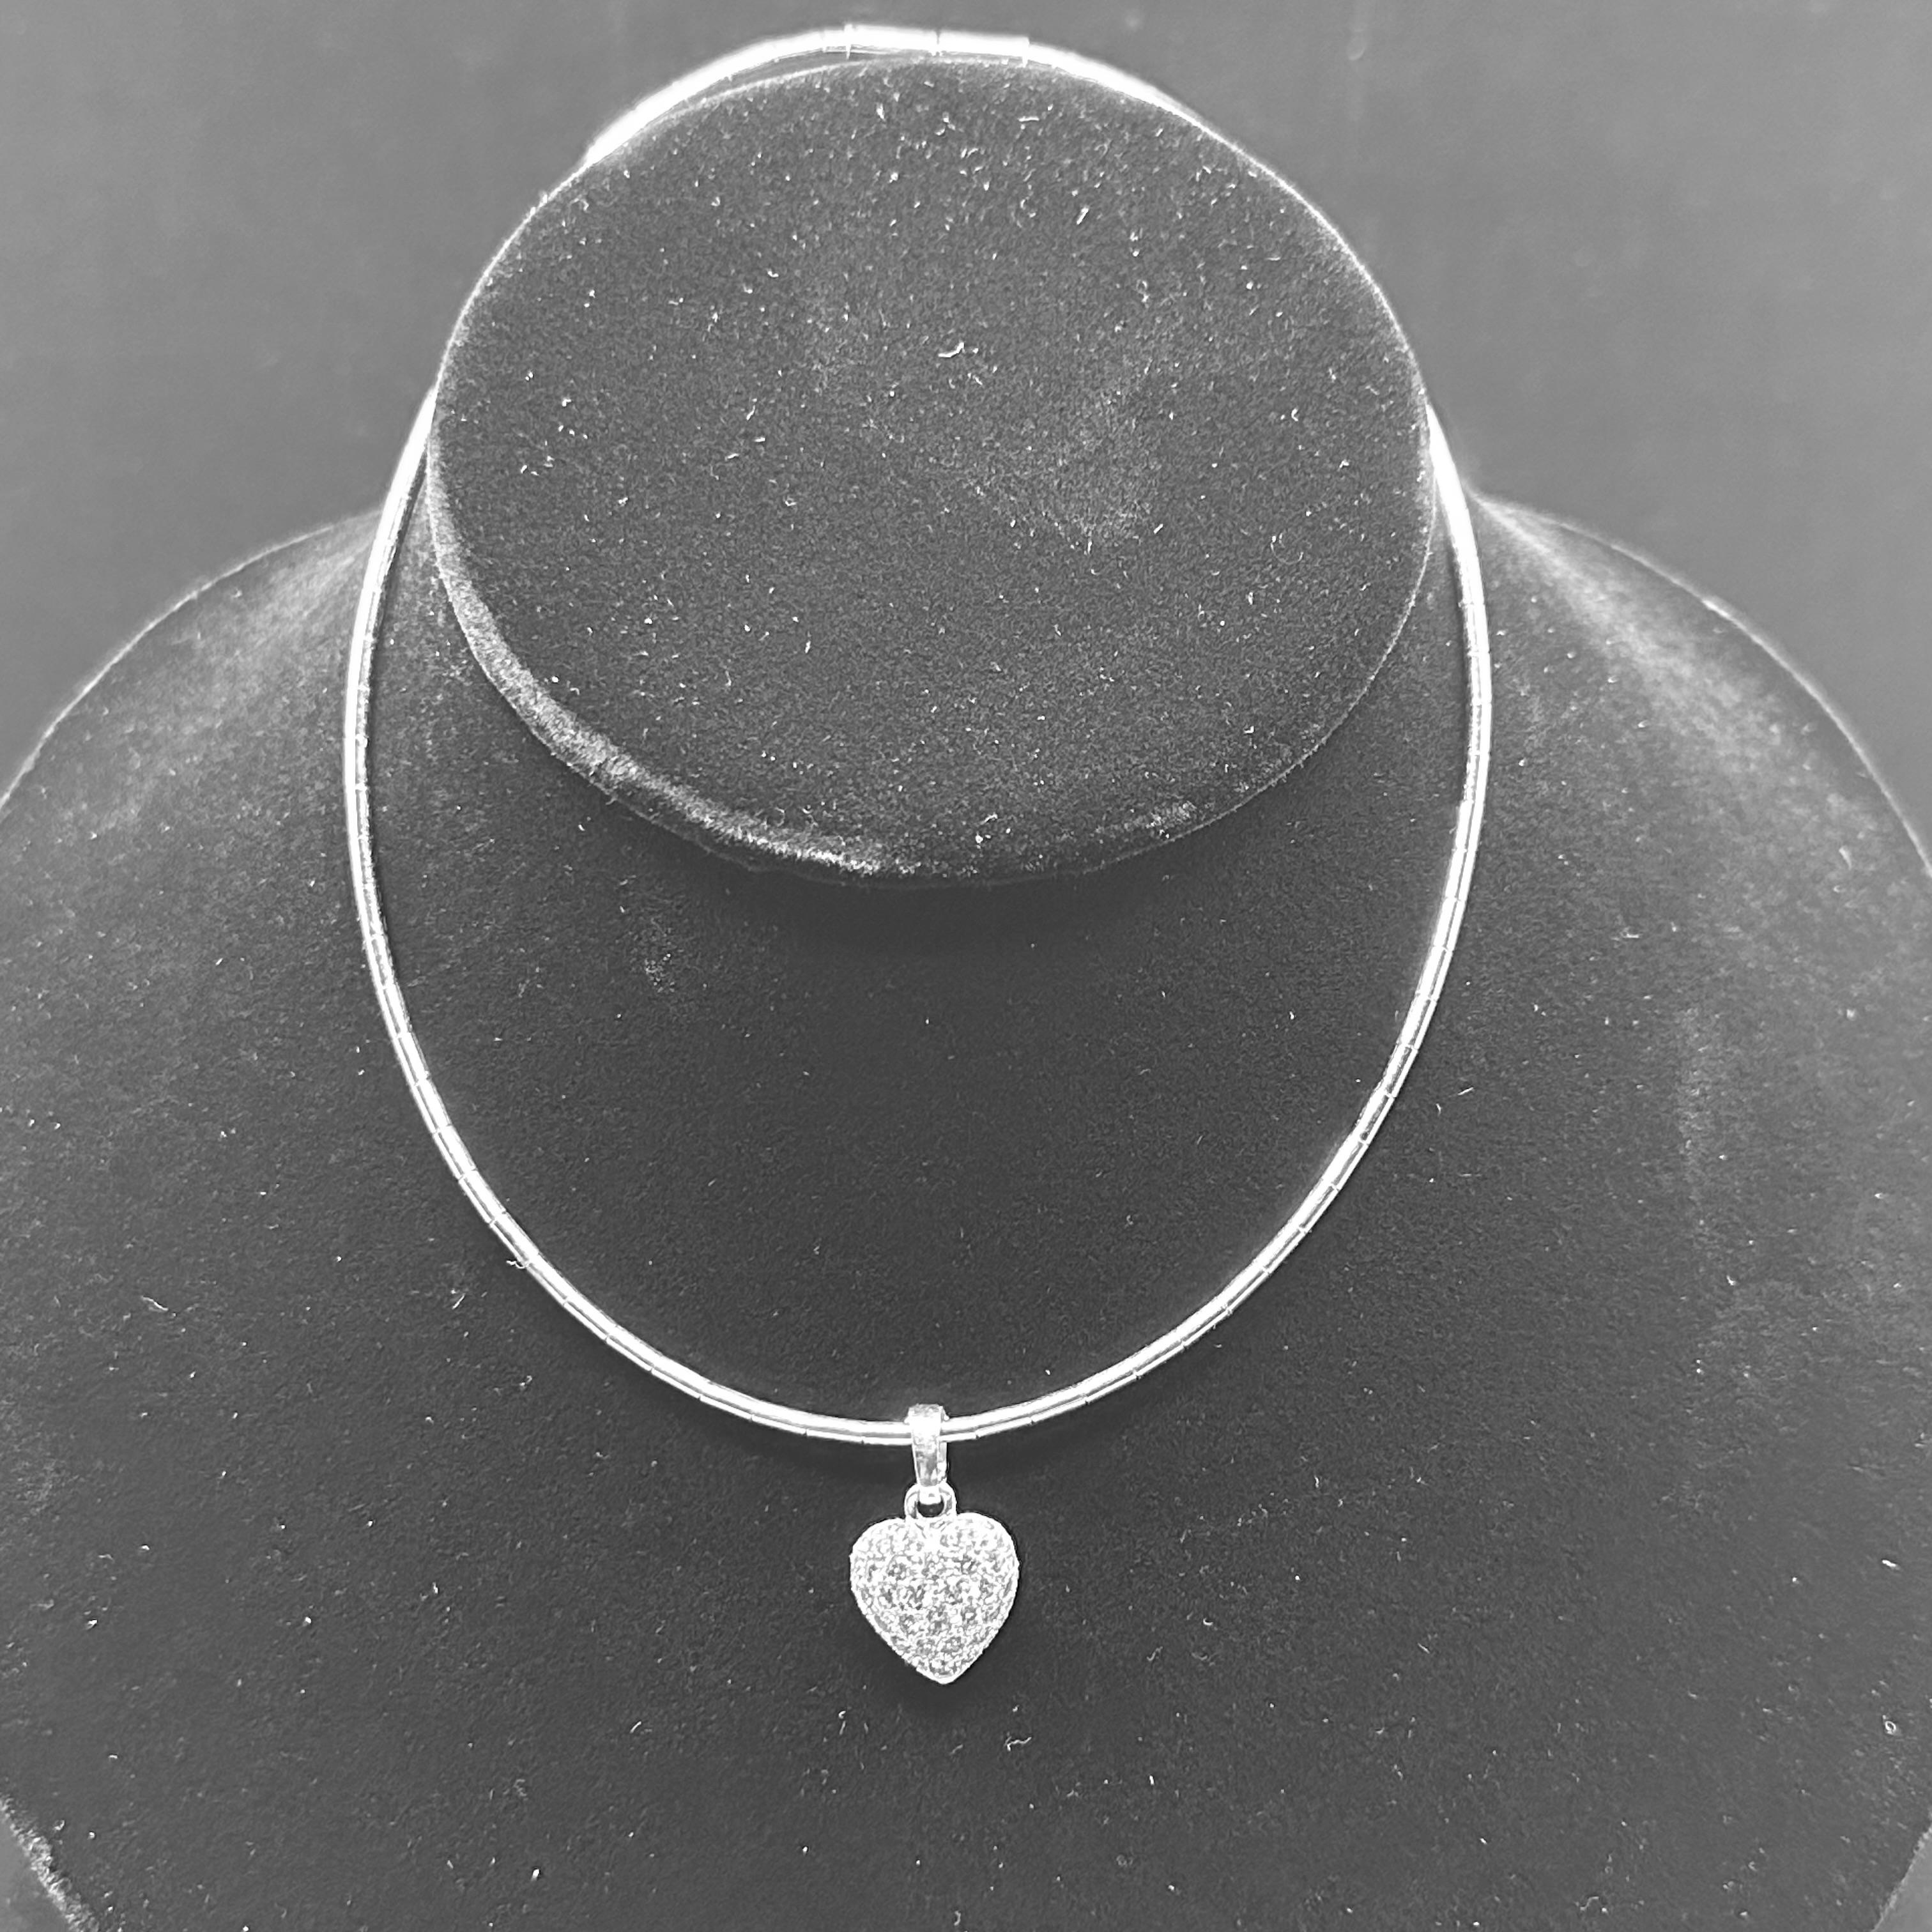 Cartier Diamond Heart Necklace 18k White Gold  In Good Condition For Sale In Beverly Hills, CA